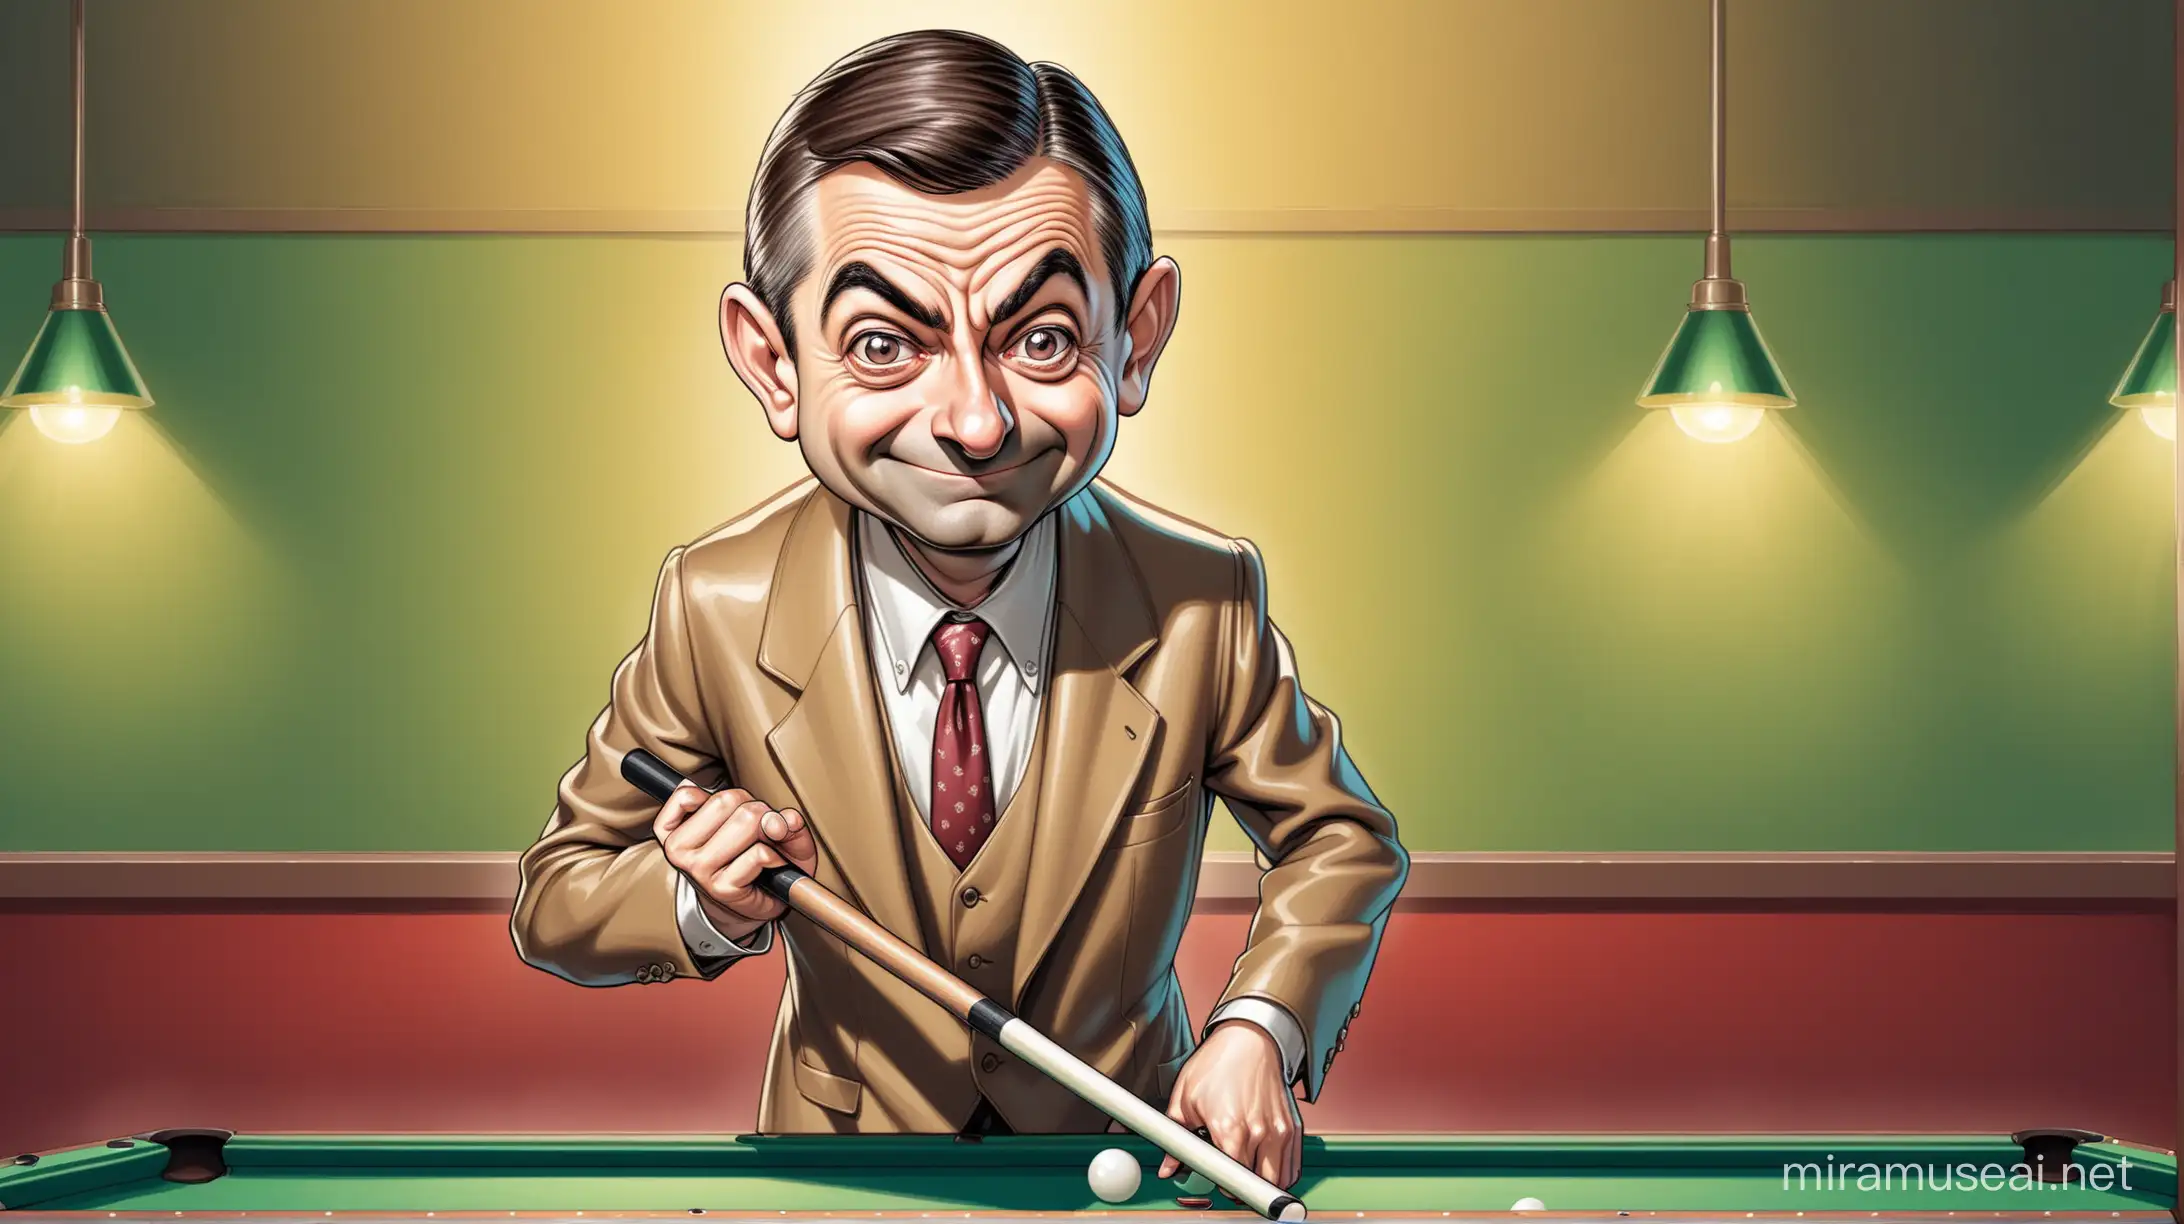 Cheerful Mr Bean Caricature Playing Pool with a Cue